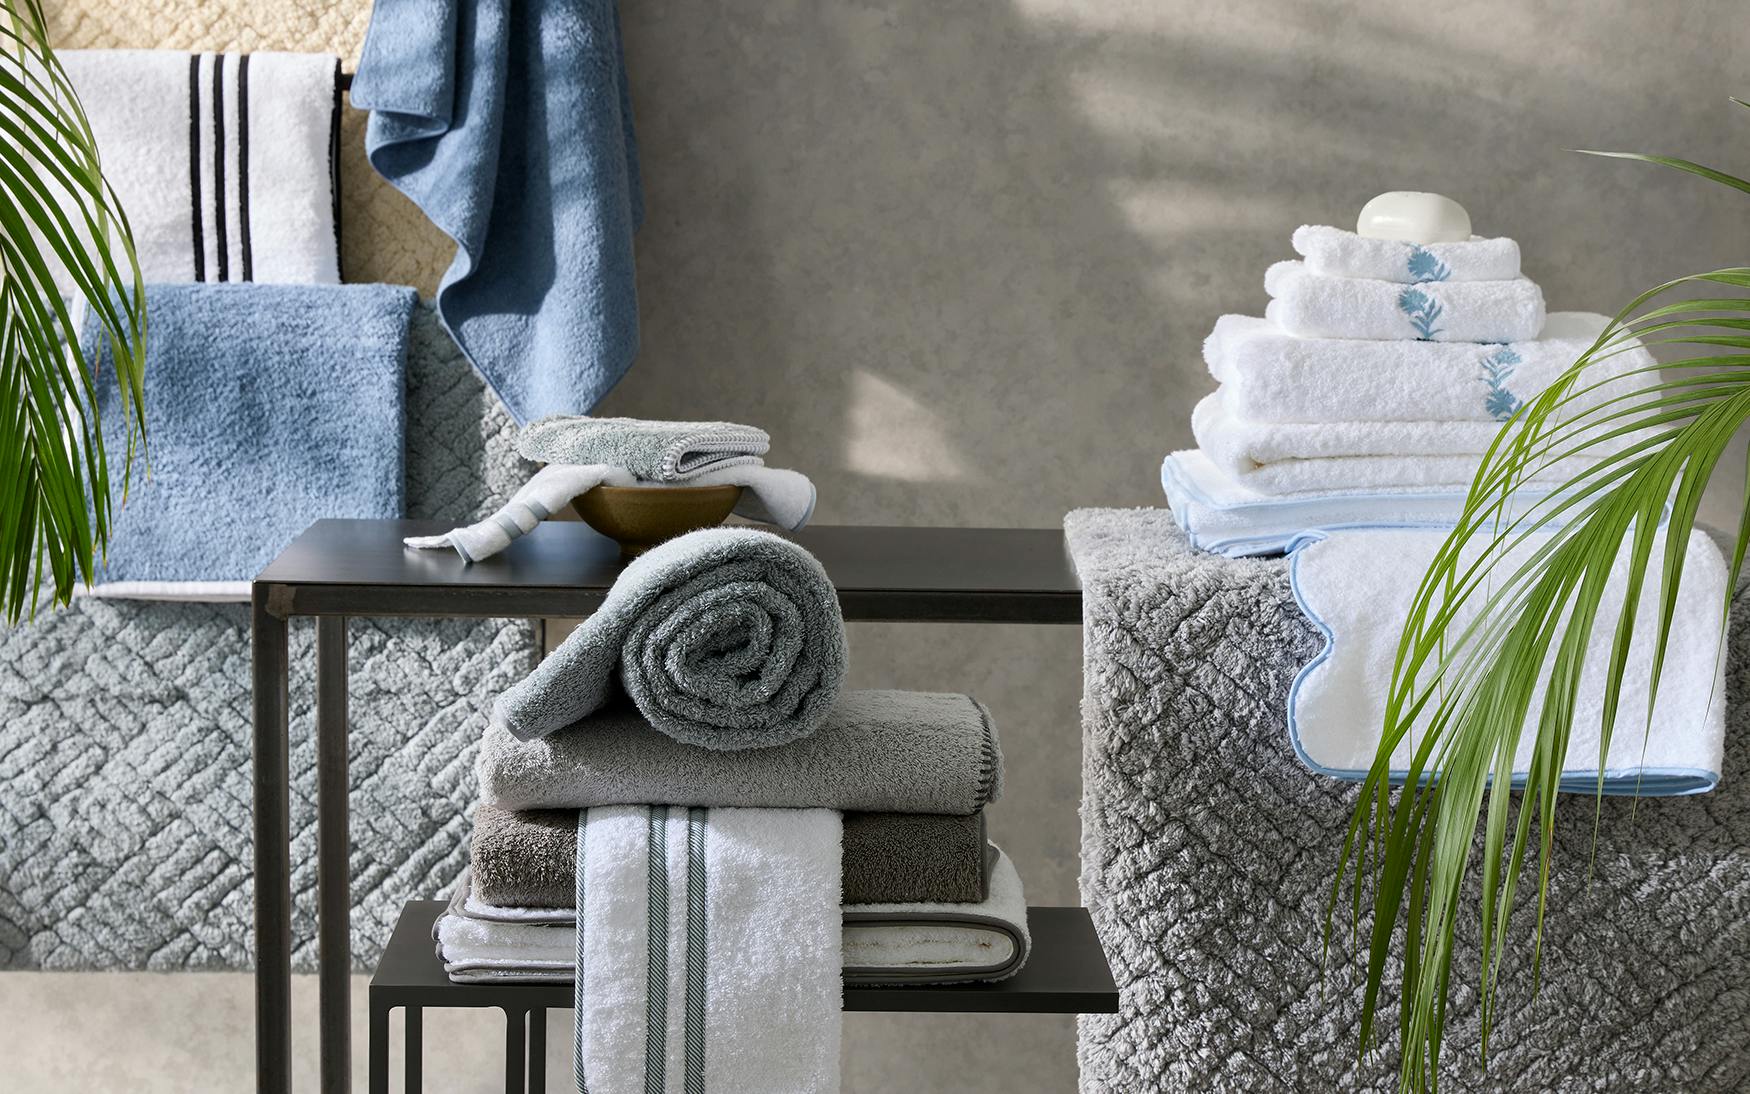 Bedded Bliss offers Whipstitch by Matouk, luxury bath towels in Louisville,  KY